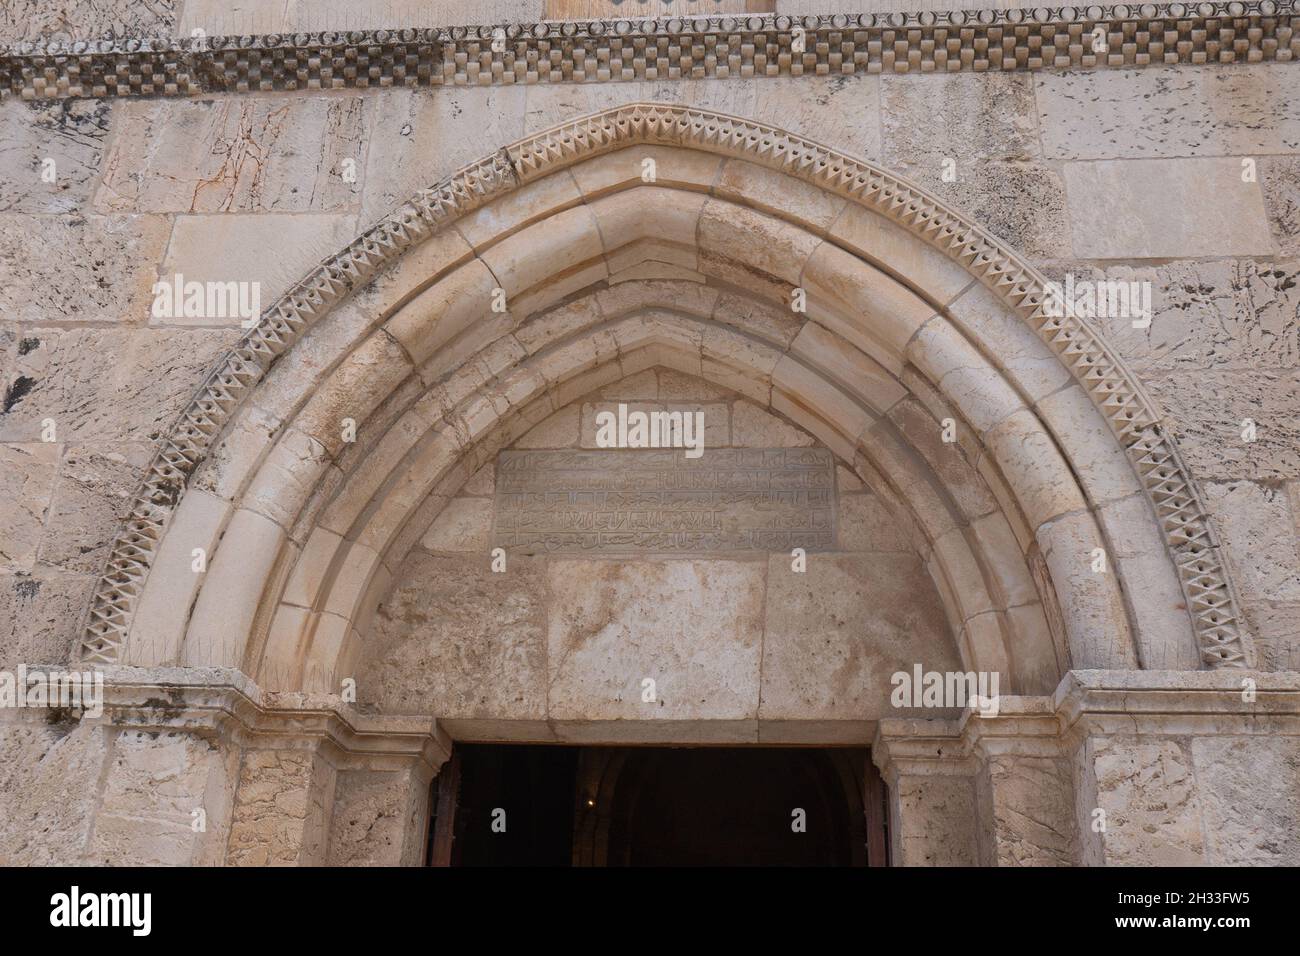 Israel, Jerusalem, Old Town, Lion's gate. Decor on the stone wall near the entrance Stock Photo